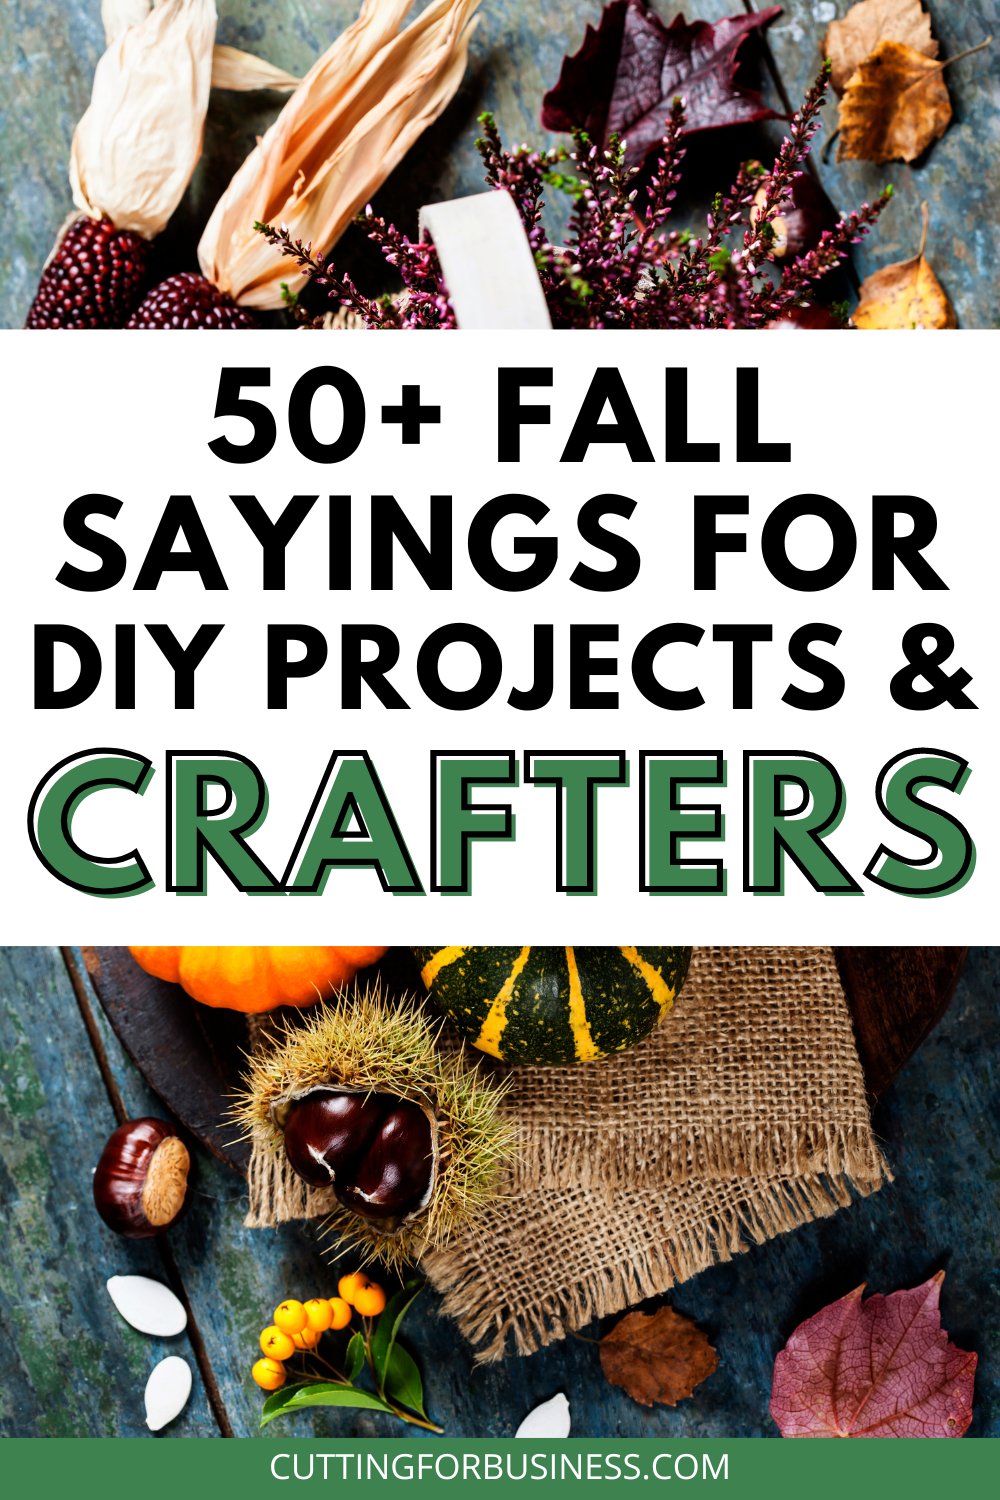 50+ Fall Sayings for Crafters - cuttingforbusiness.com